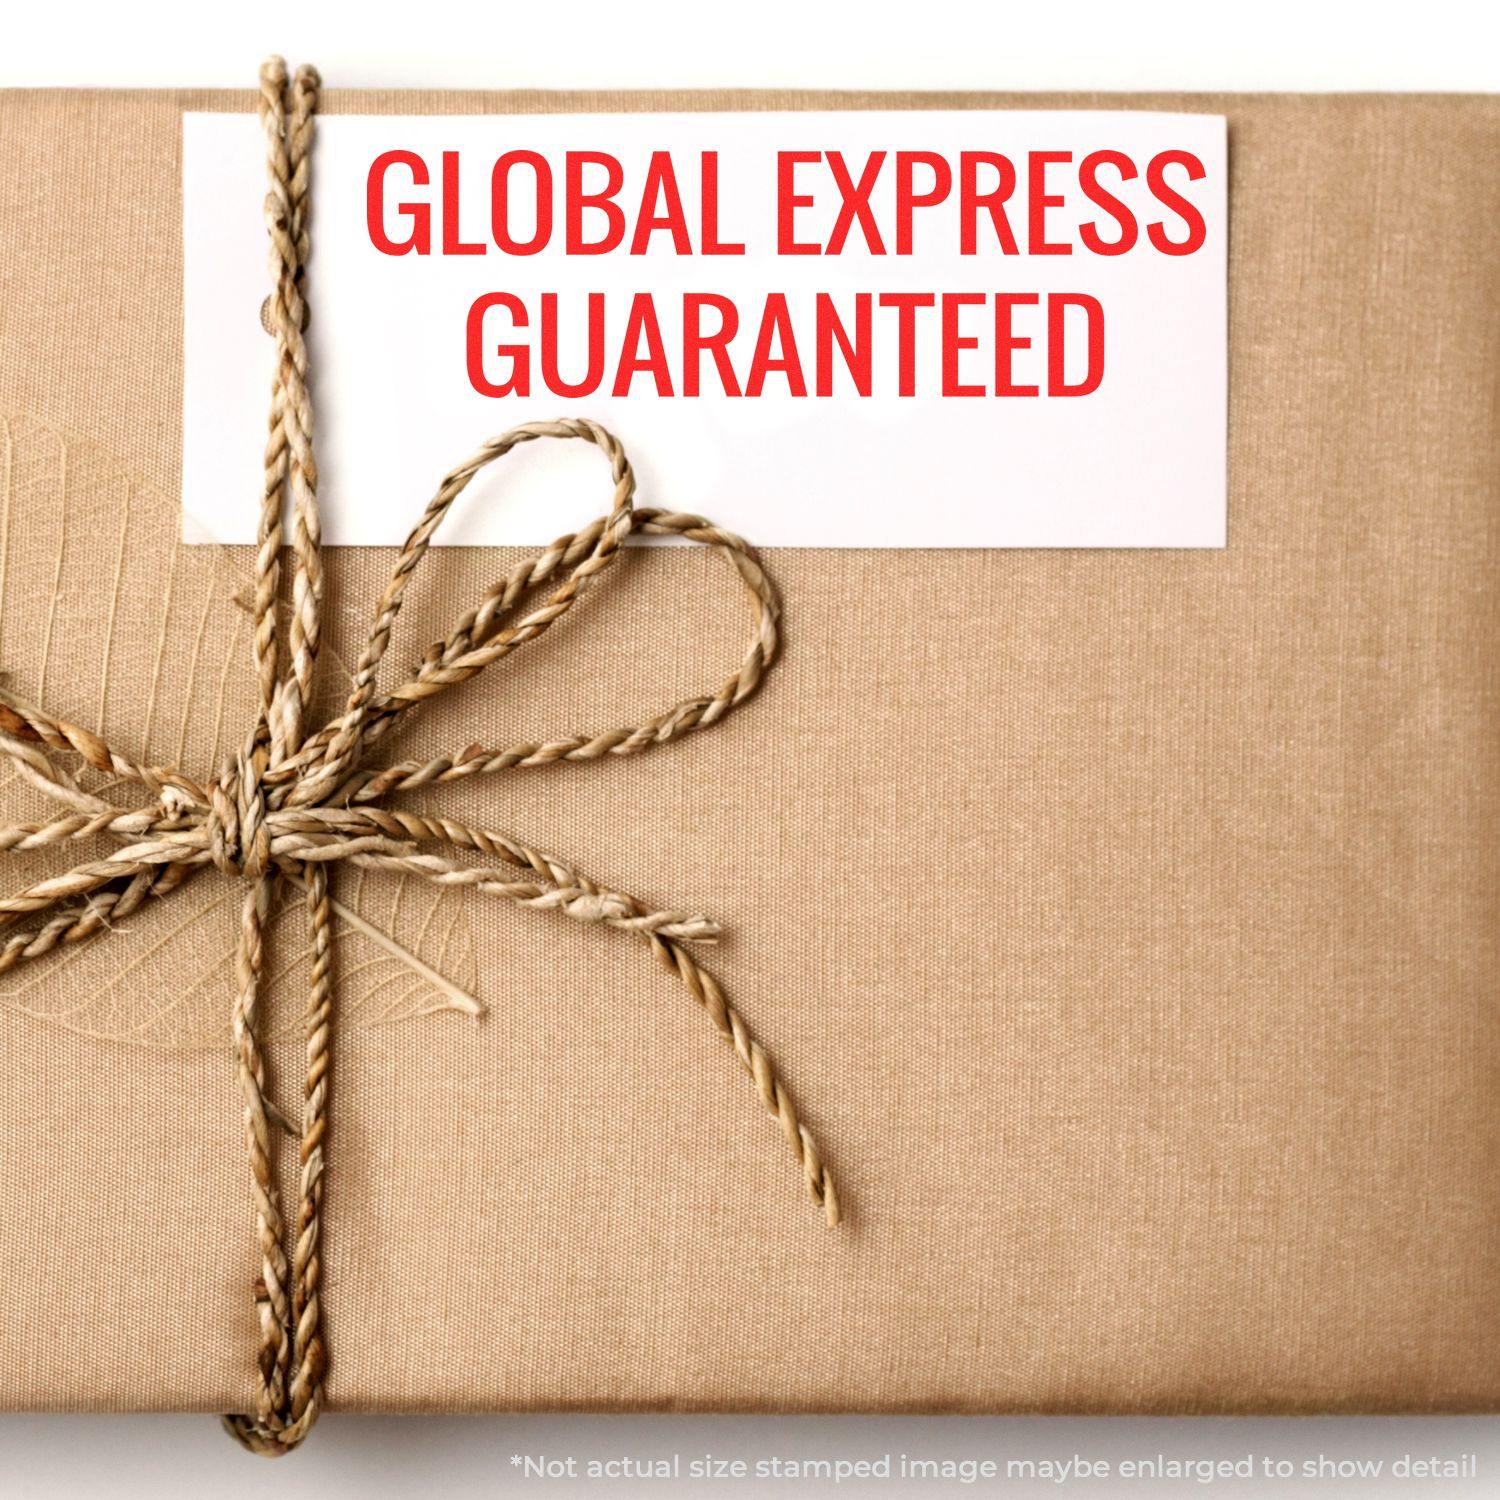 A stock office pre-inked stamp with a stamped image showing how the text "GLOBAL EXPRESS GUARANTEED" is displayed after stamping.